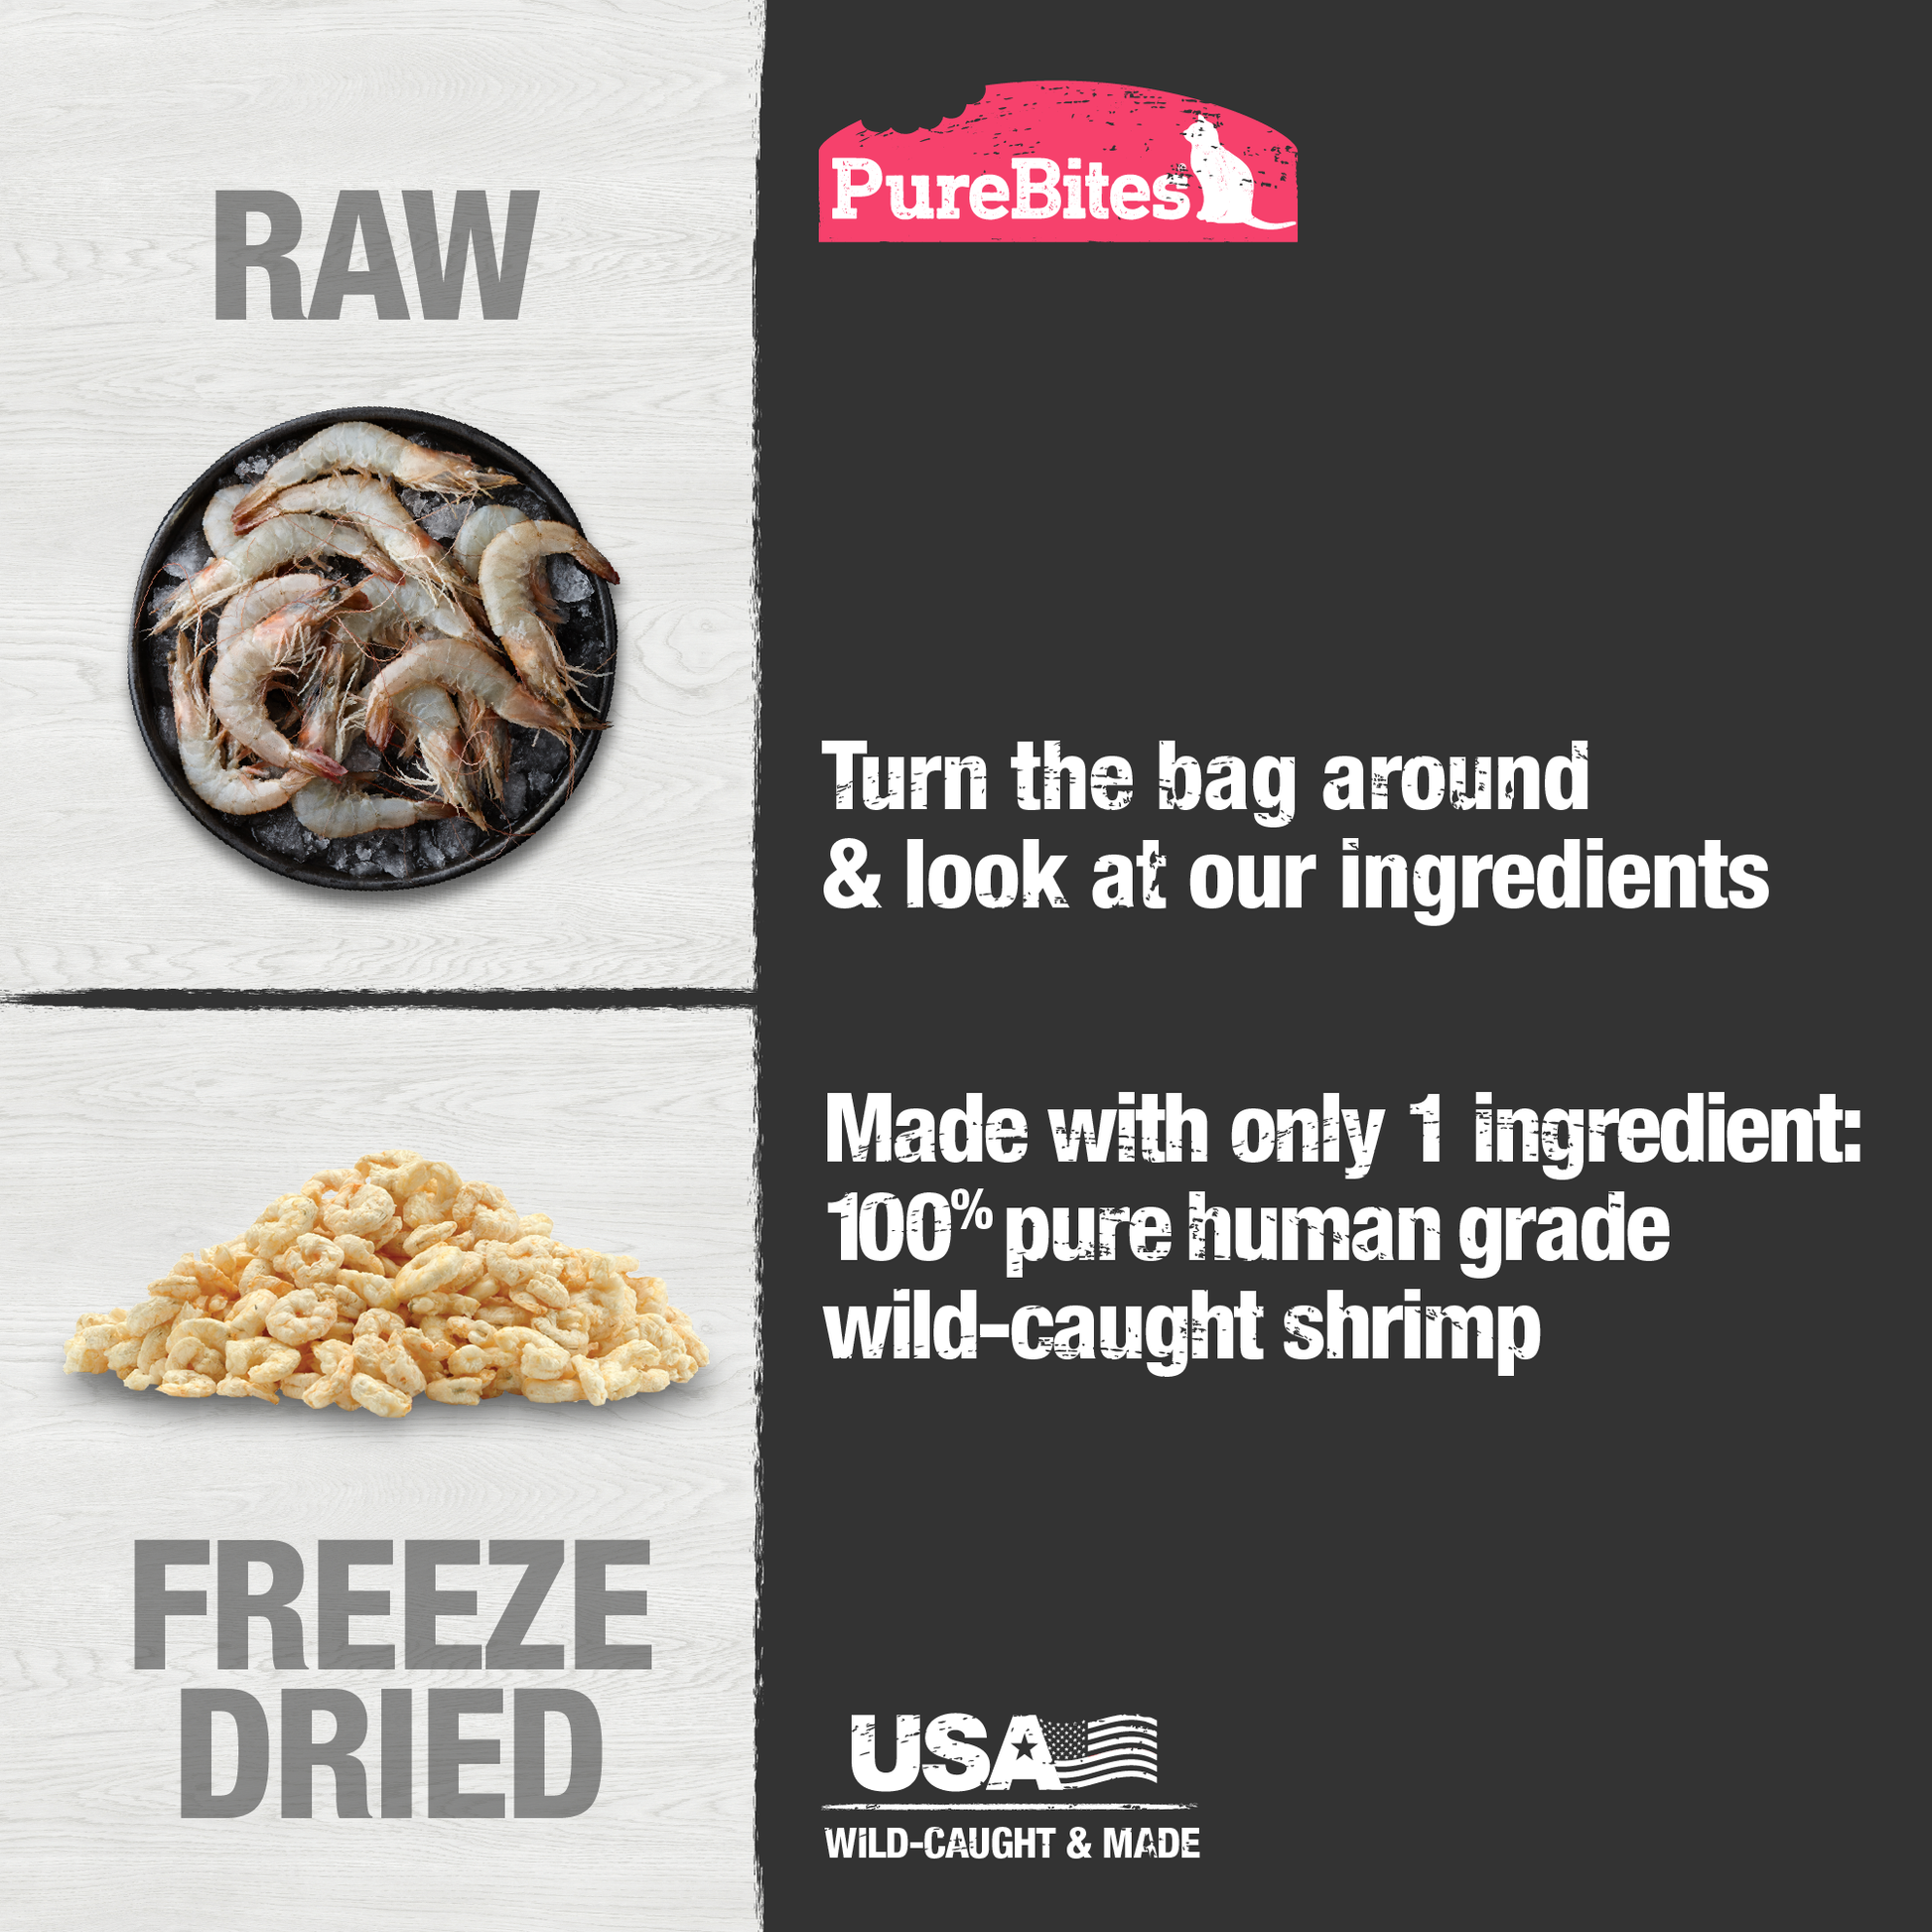 Made with only 1 Ingredient you can read, pronounce, and trust: USA sourced wild-caught human grade Shrimp.